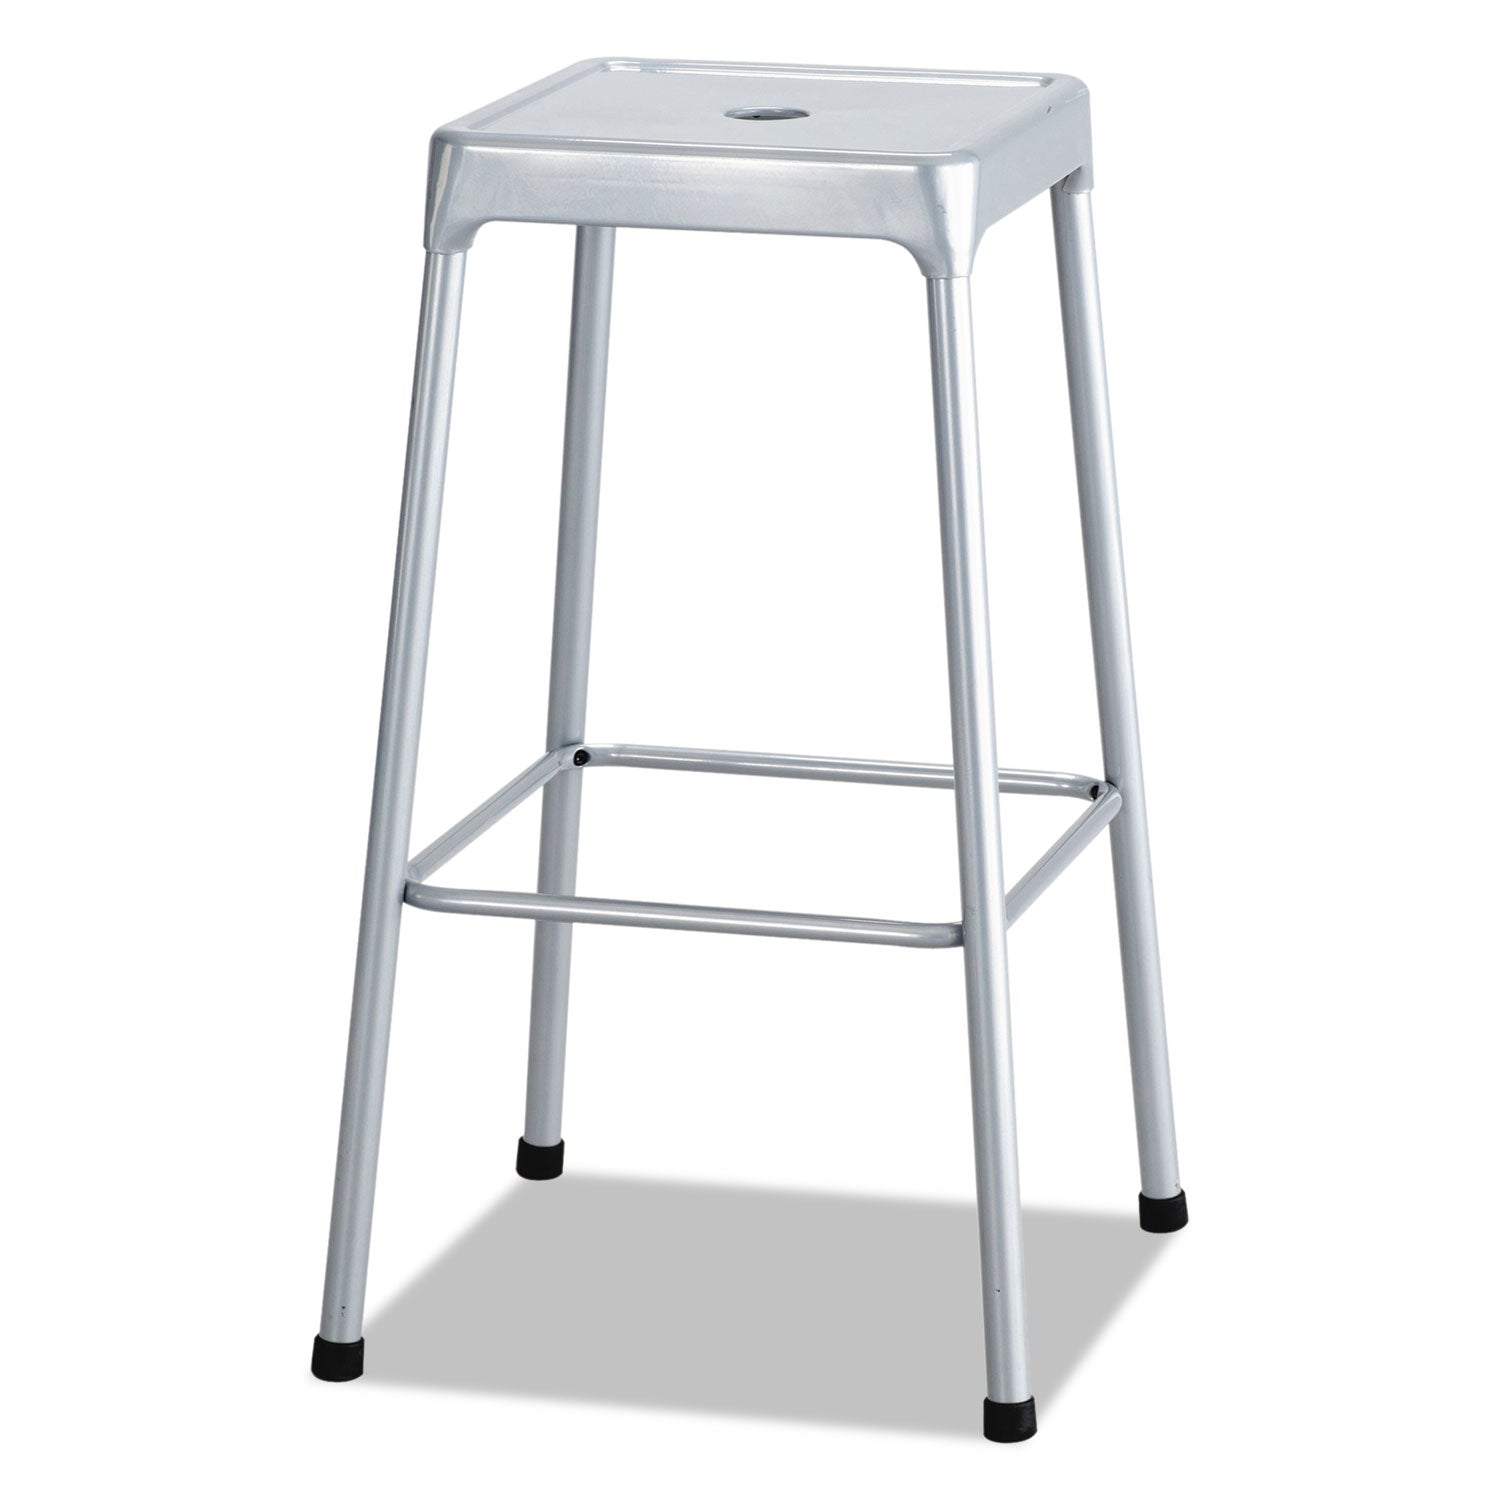 Bar-Height Steel Stool, Backless, Supports Up to 250 lb, 29" Seat Height, Silver - 